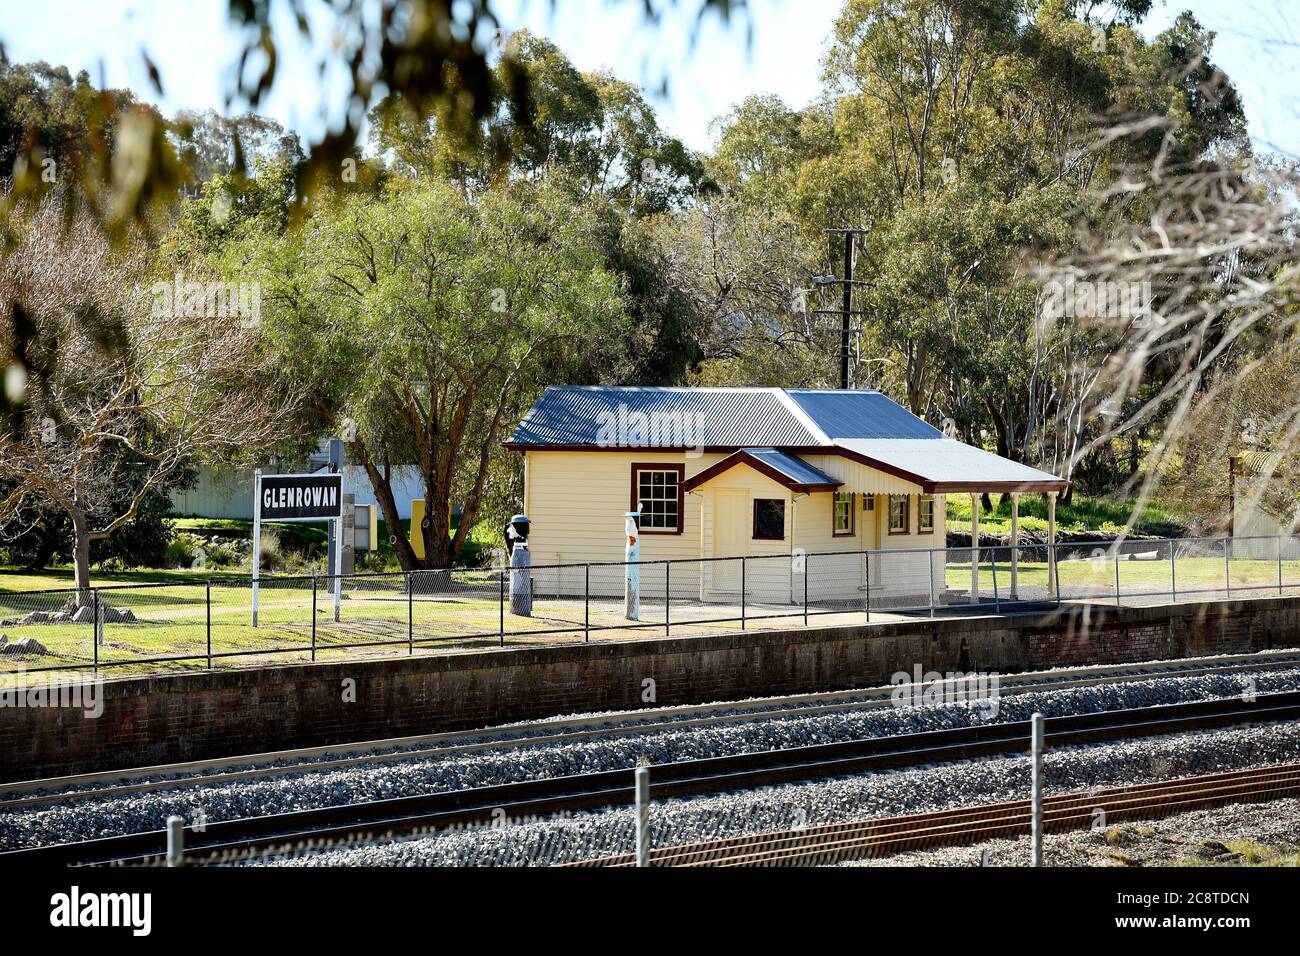 Glenrowan, Victoria. The Glenrowan Station where Ned Kelly, wounded by gunshots, was treated before being sent by train to Benalla and then Melbourne. Stock Photo